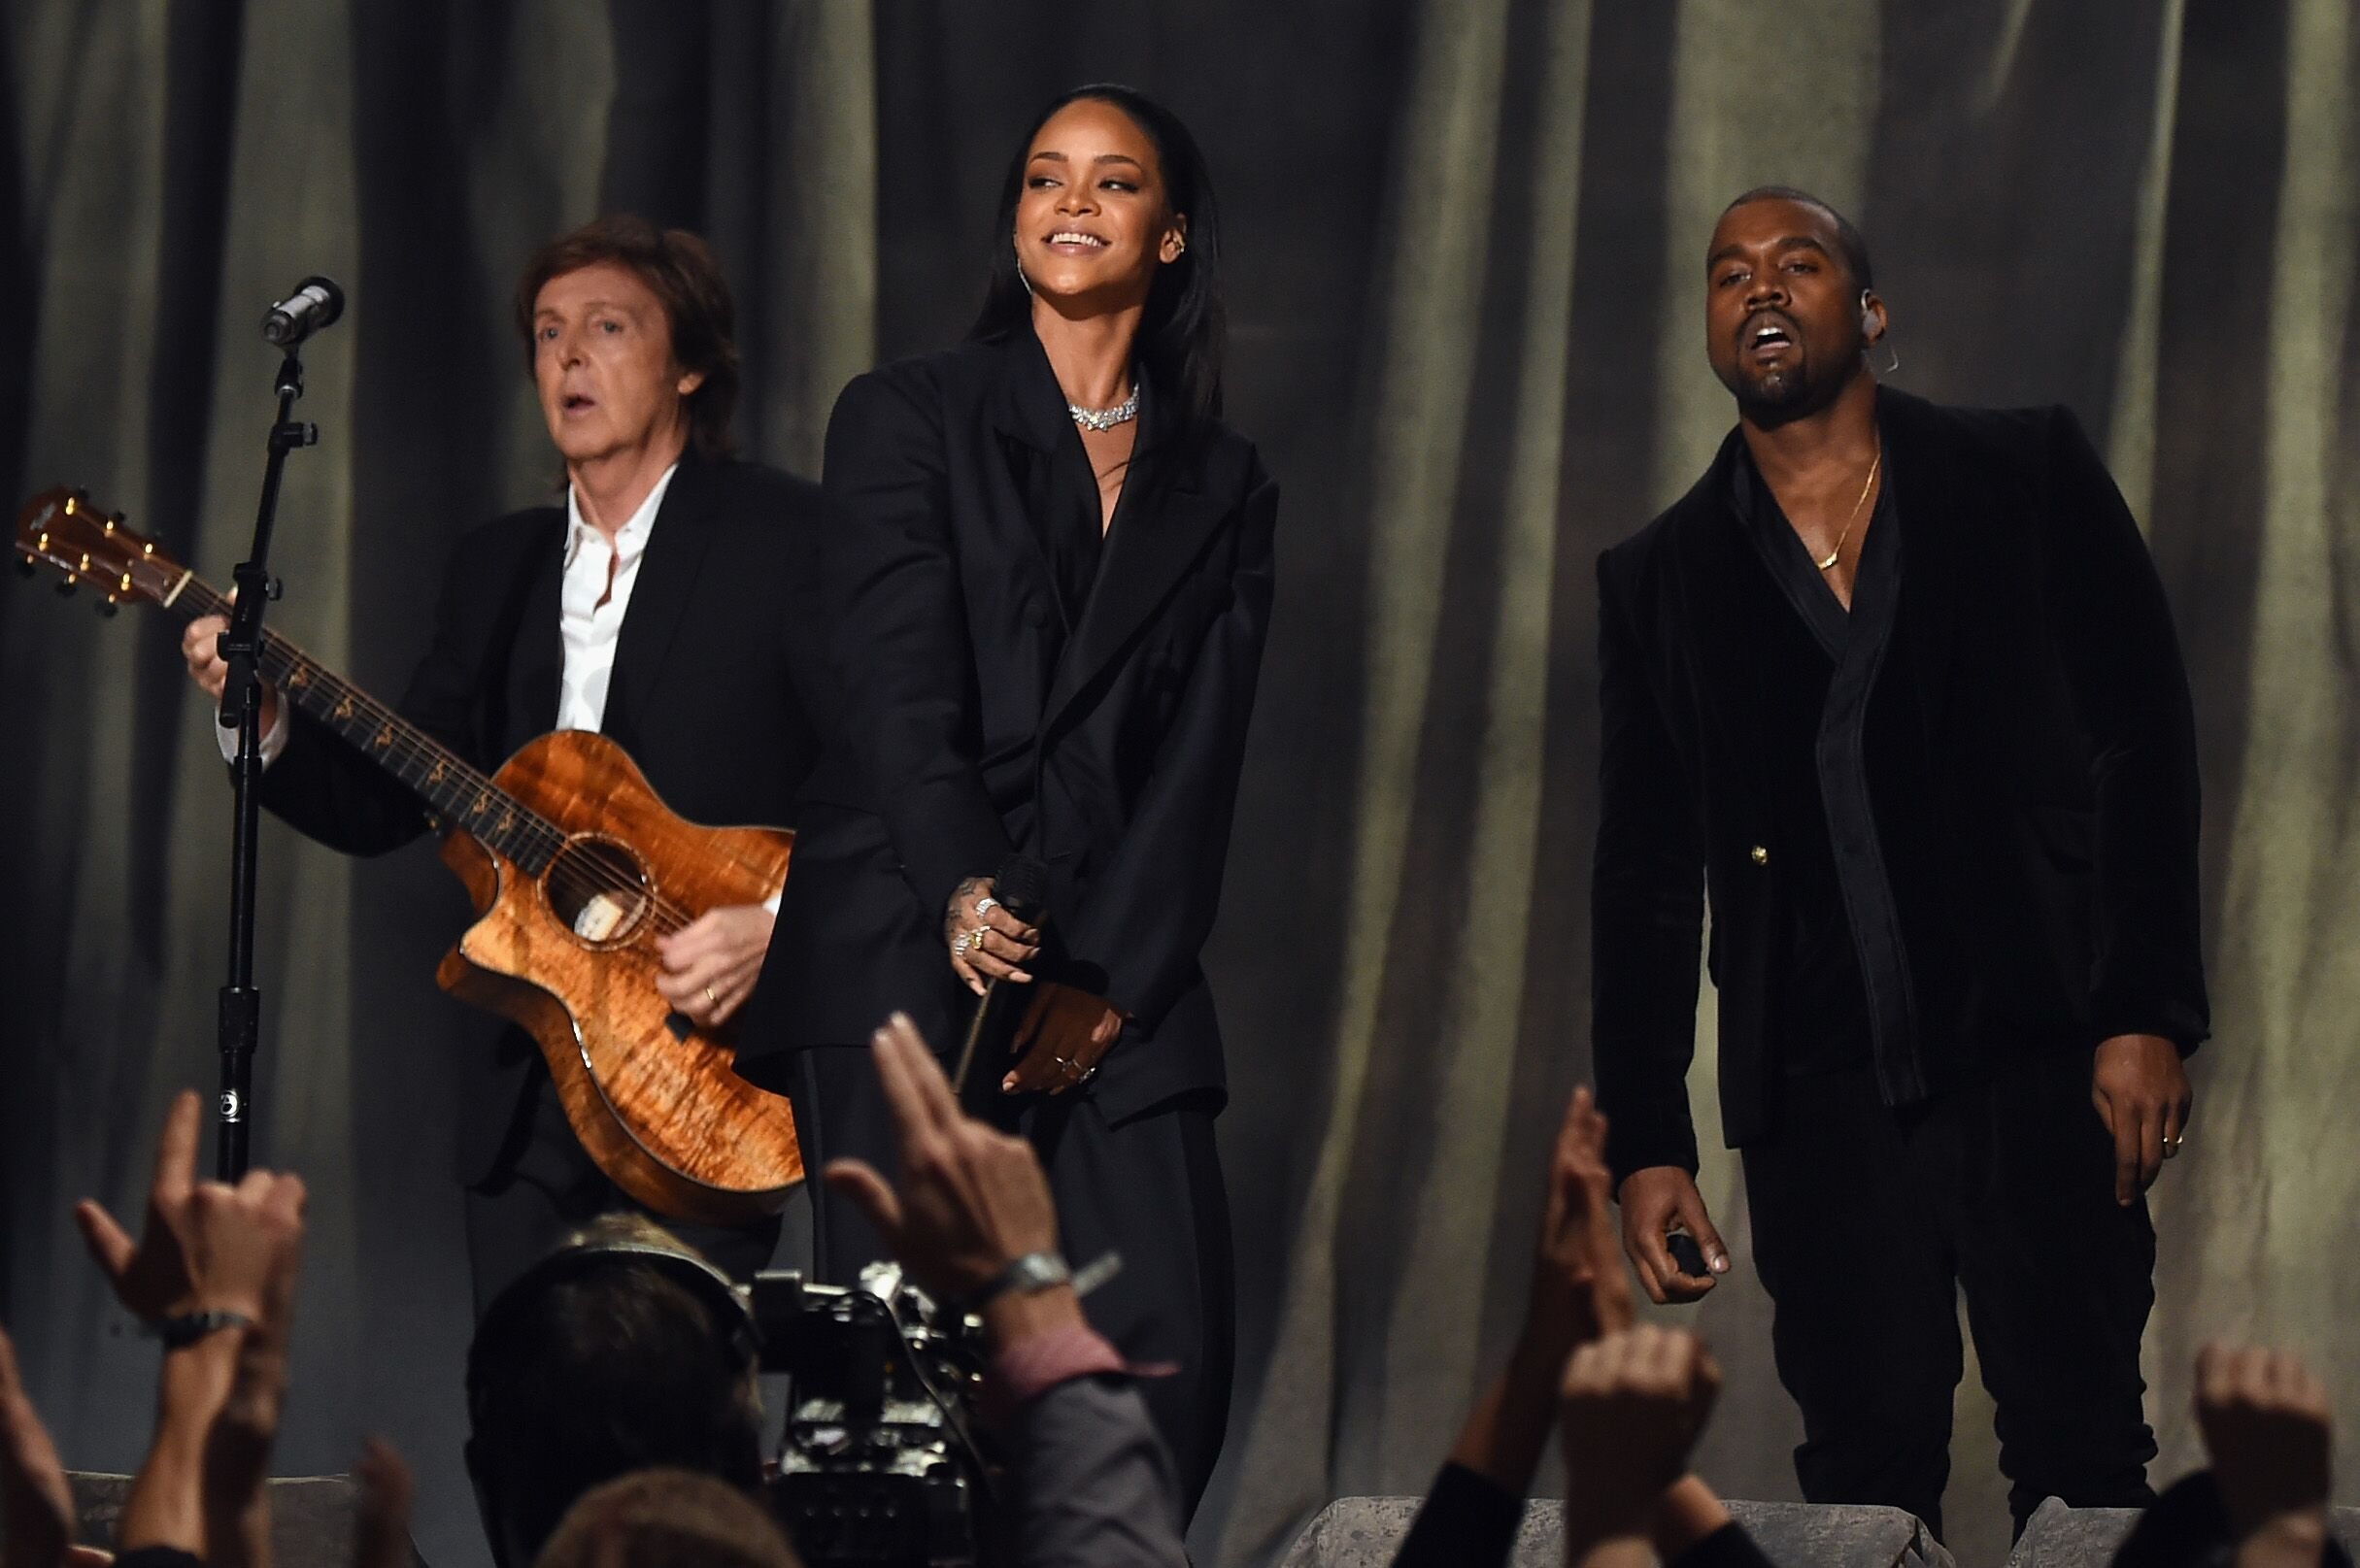 Rihanna performing with Sir Paul McCarthney and Kanye West in 2015/ Source: Getty Image